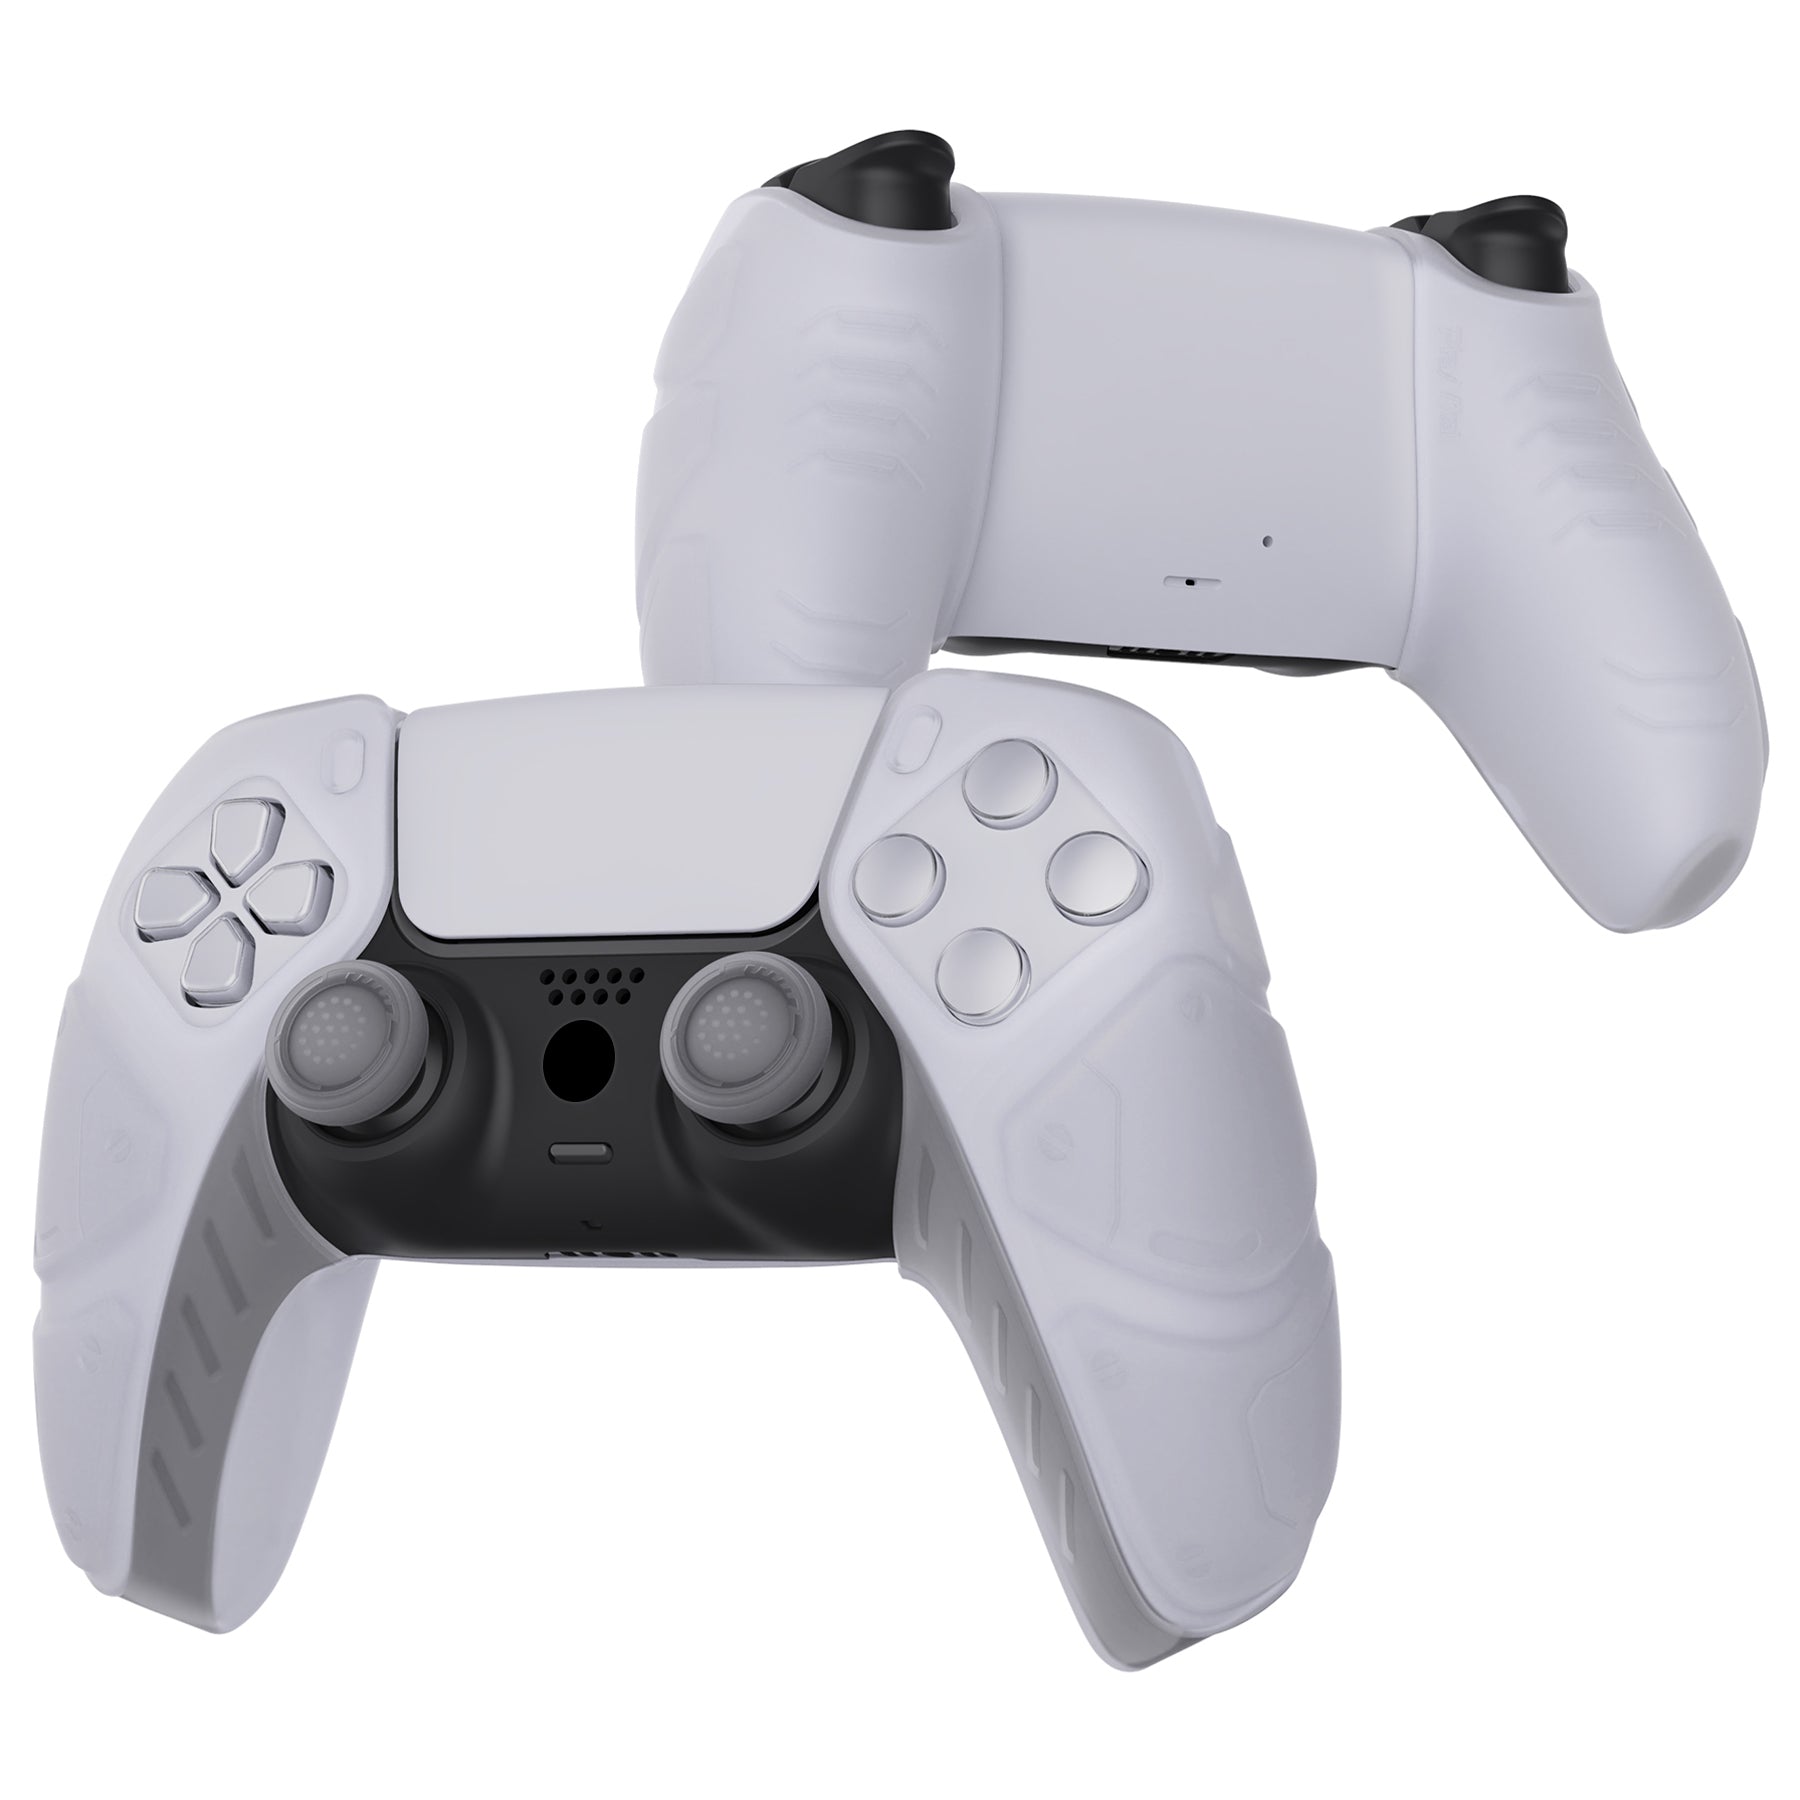 PlayVital Mecha Edition Anti-Slip Silicone Cover Skin with Thumb Grip Caps for PS5 Wireless Controller - Compatible with Charging Station - Clear White - JGPF010 PlayVital